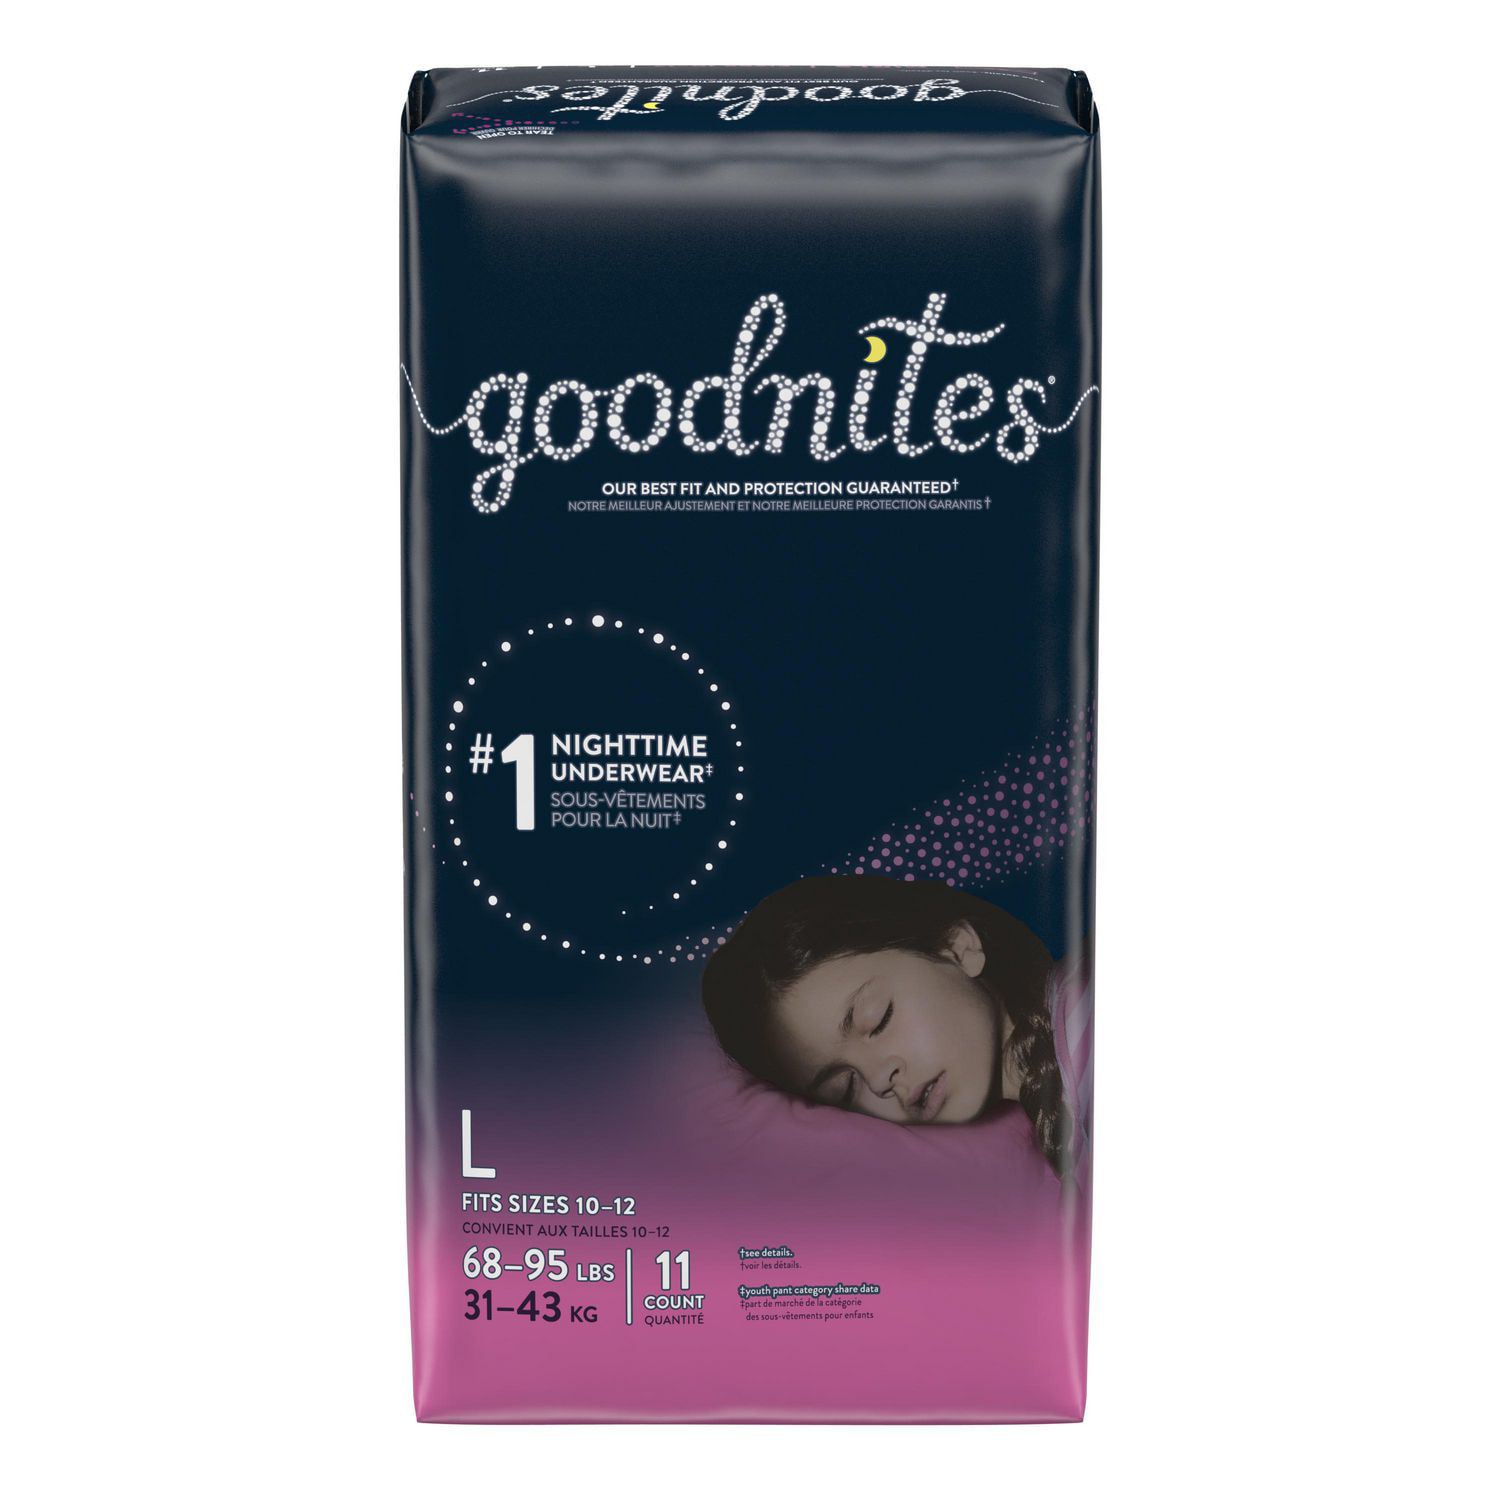 Goodnites Girls' Nighttime Bedwetting Underwear, Size Large (68-95 lbs), 34  Ct (2 Packs of 17), Packaging May Vary